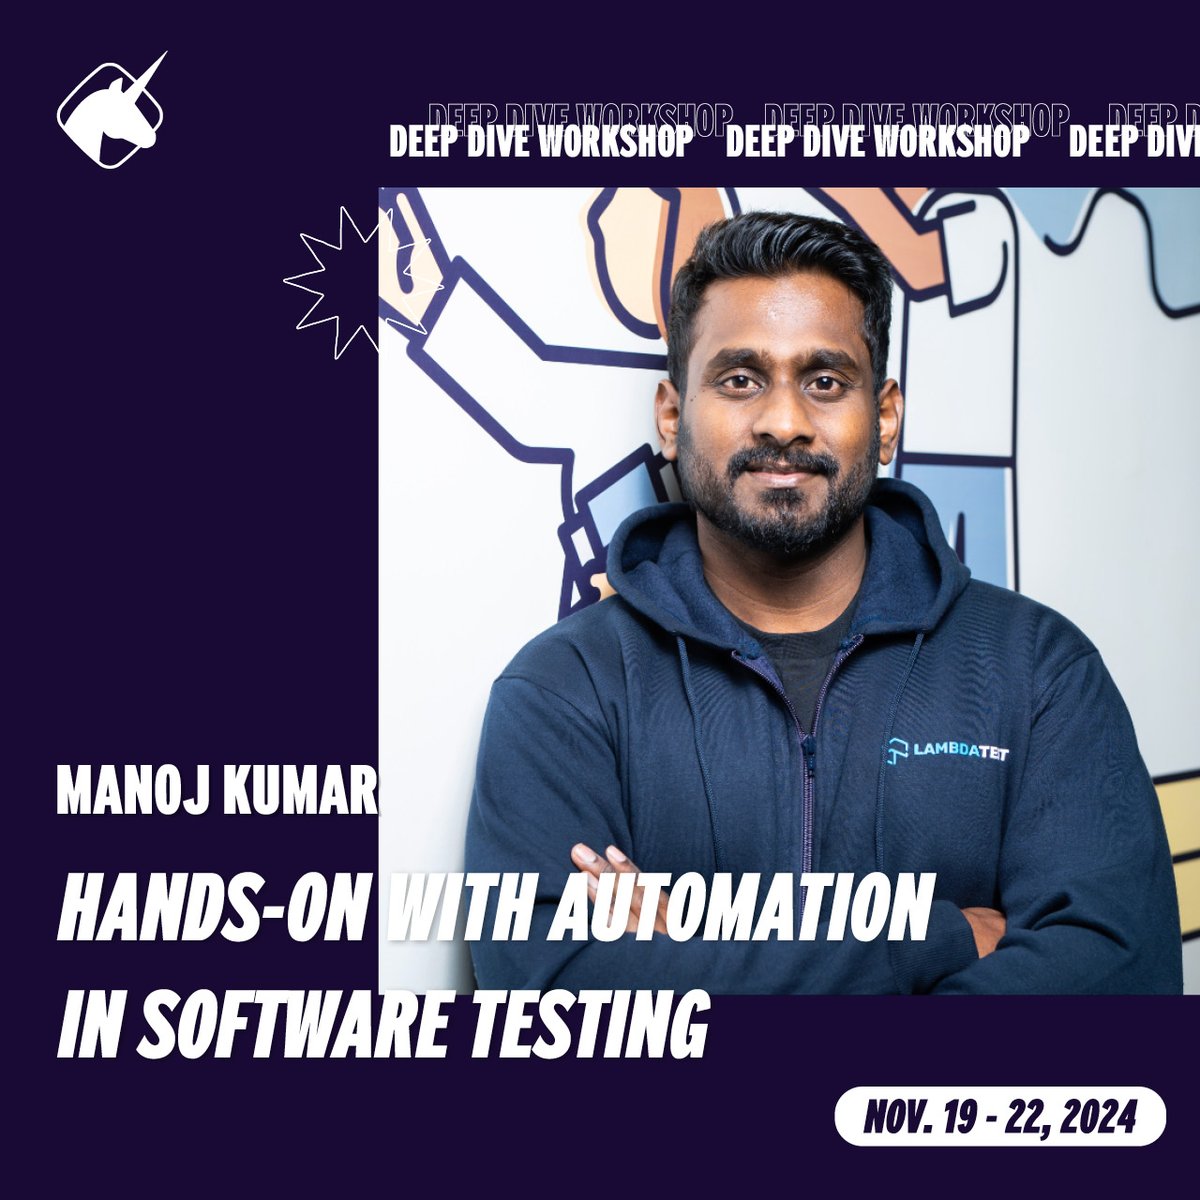 This hands-on workshop addresses common challenges in transitioning from exploratory testing to automation, with #Java bindings for #Selenium as an example.
@manoj9788
Book your ticket now.
More about the #AgileTD workshop here: tinyurl.com/35er4zk6